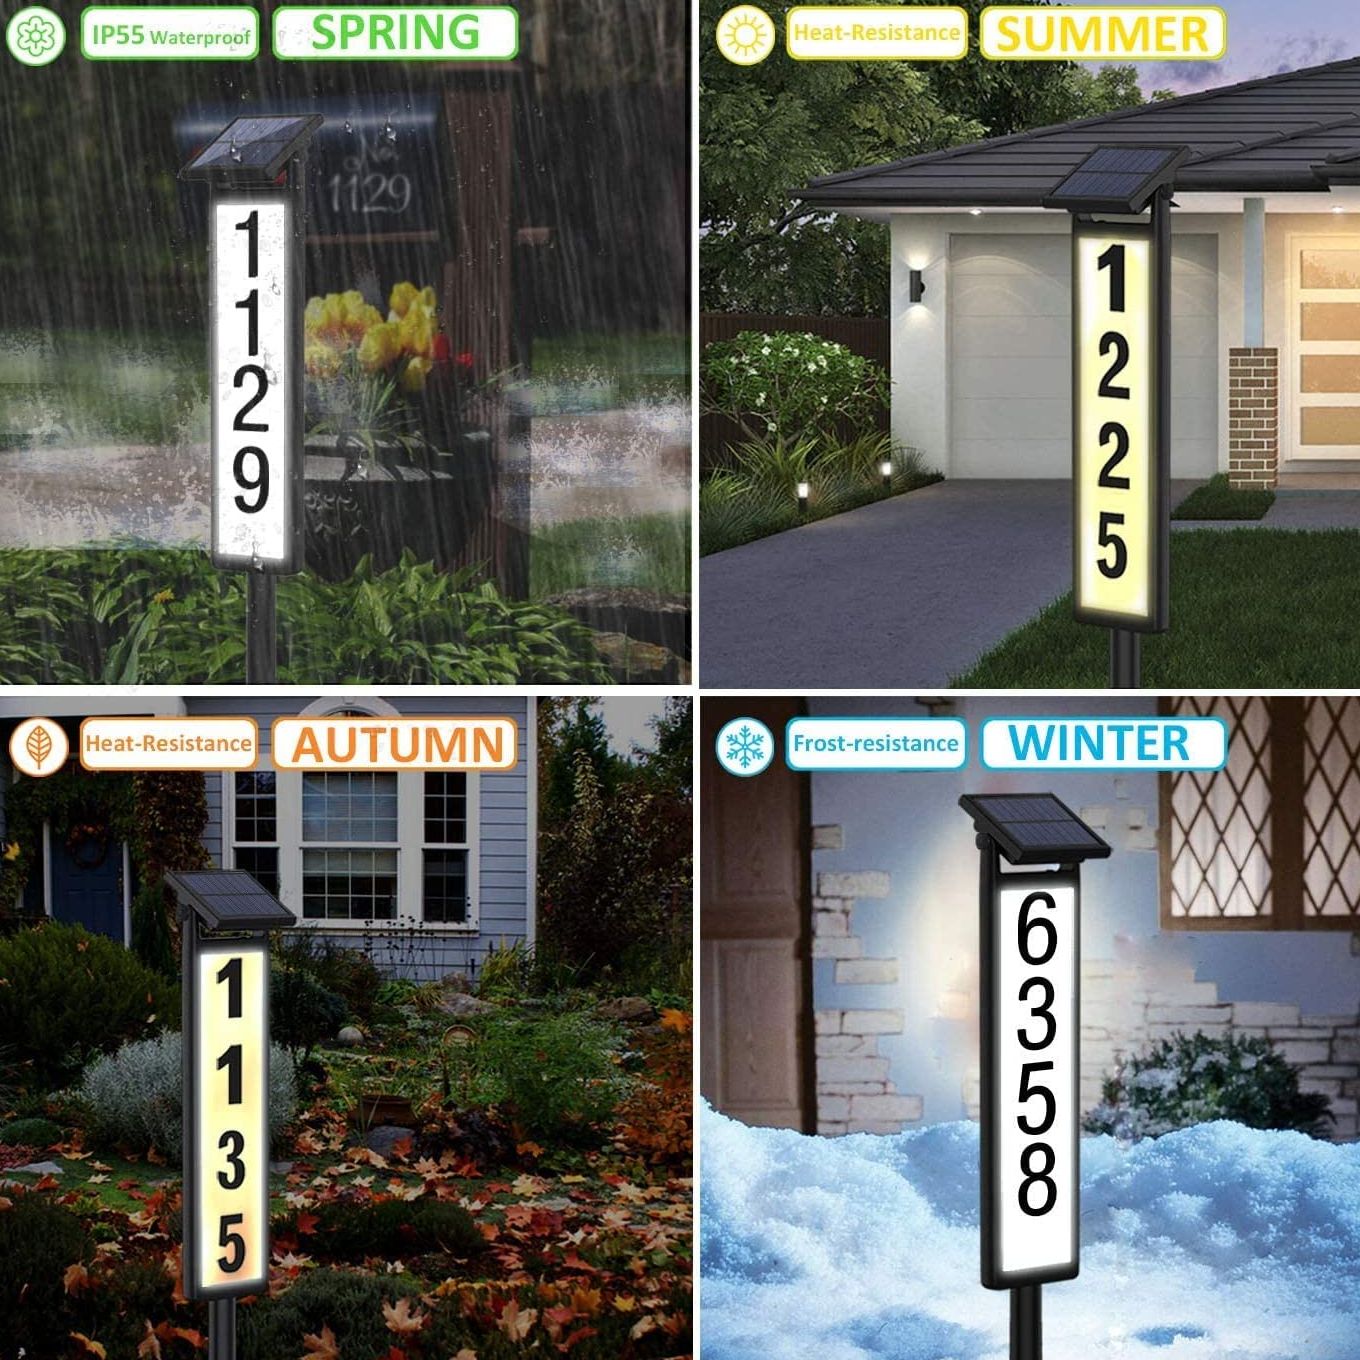 SUNGATH Lighted House Numbers for Outside, Waterproof Solar Address Signs for Yard with Stakes, Solar Powered LED Illuminated Address Plaques for Houses&Home (Height 35 Inches, 1 Pack)